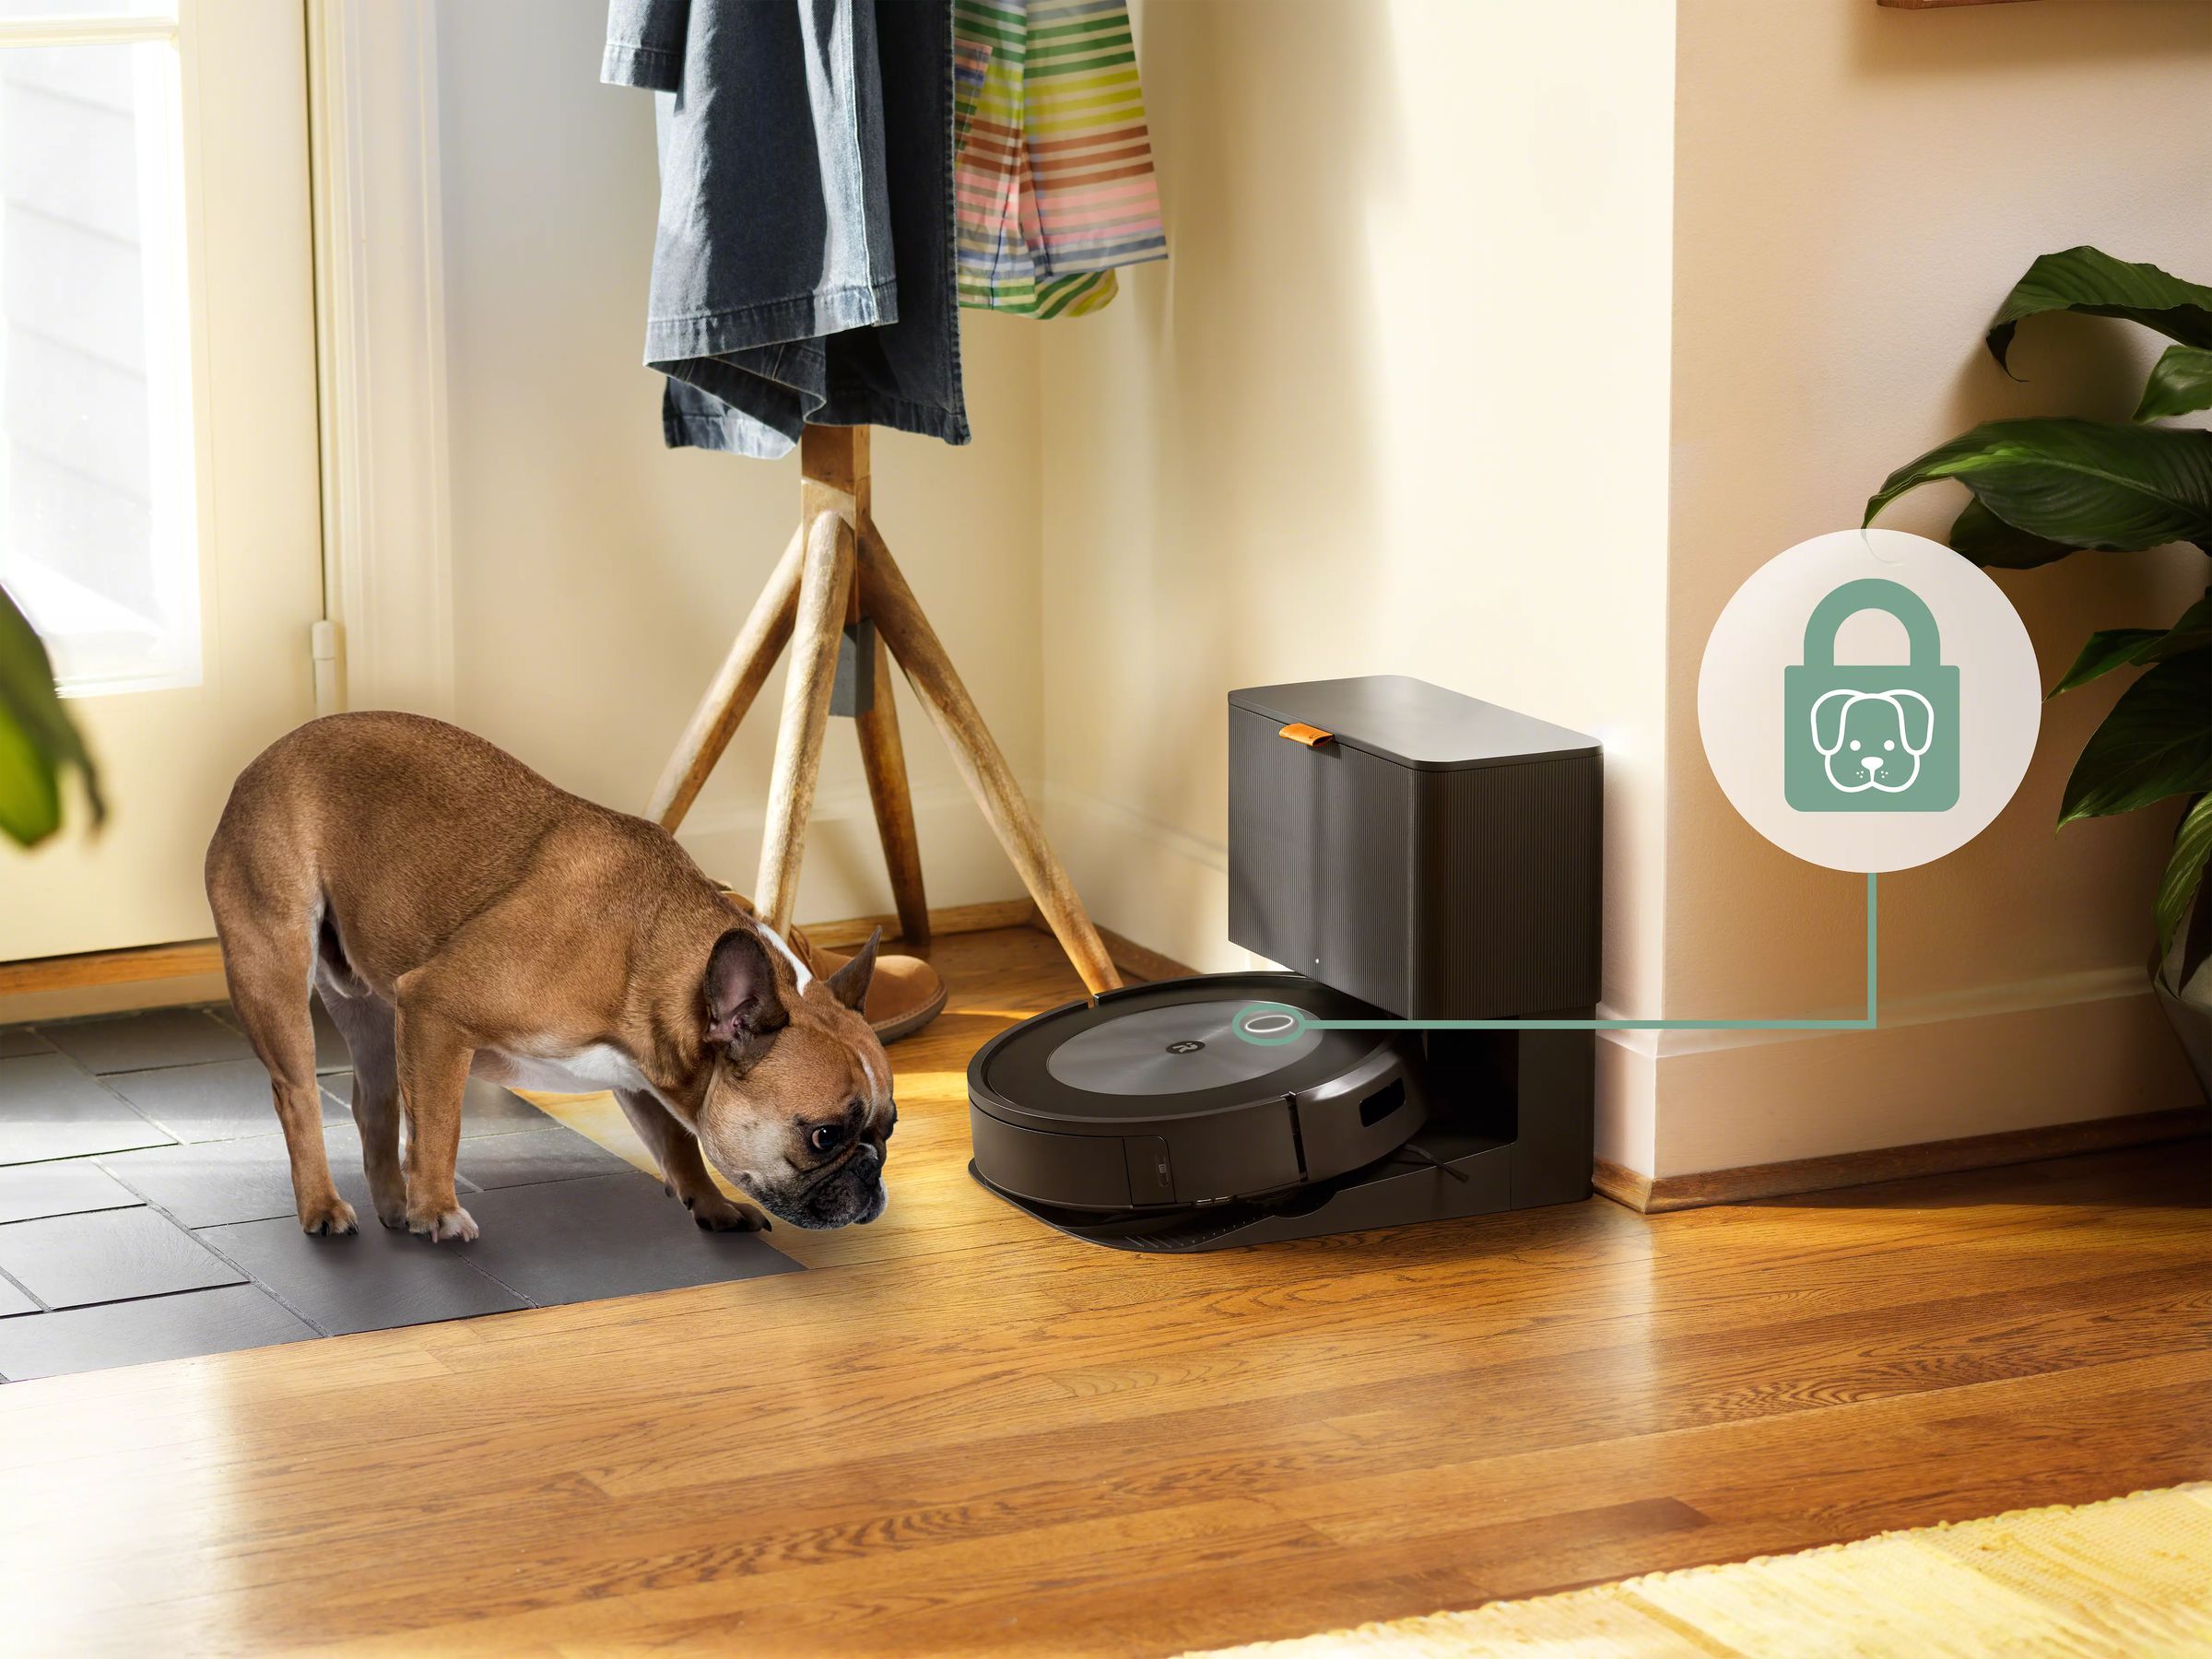 Good news, you can now prevent your dog from vacuuming your house.